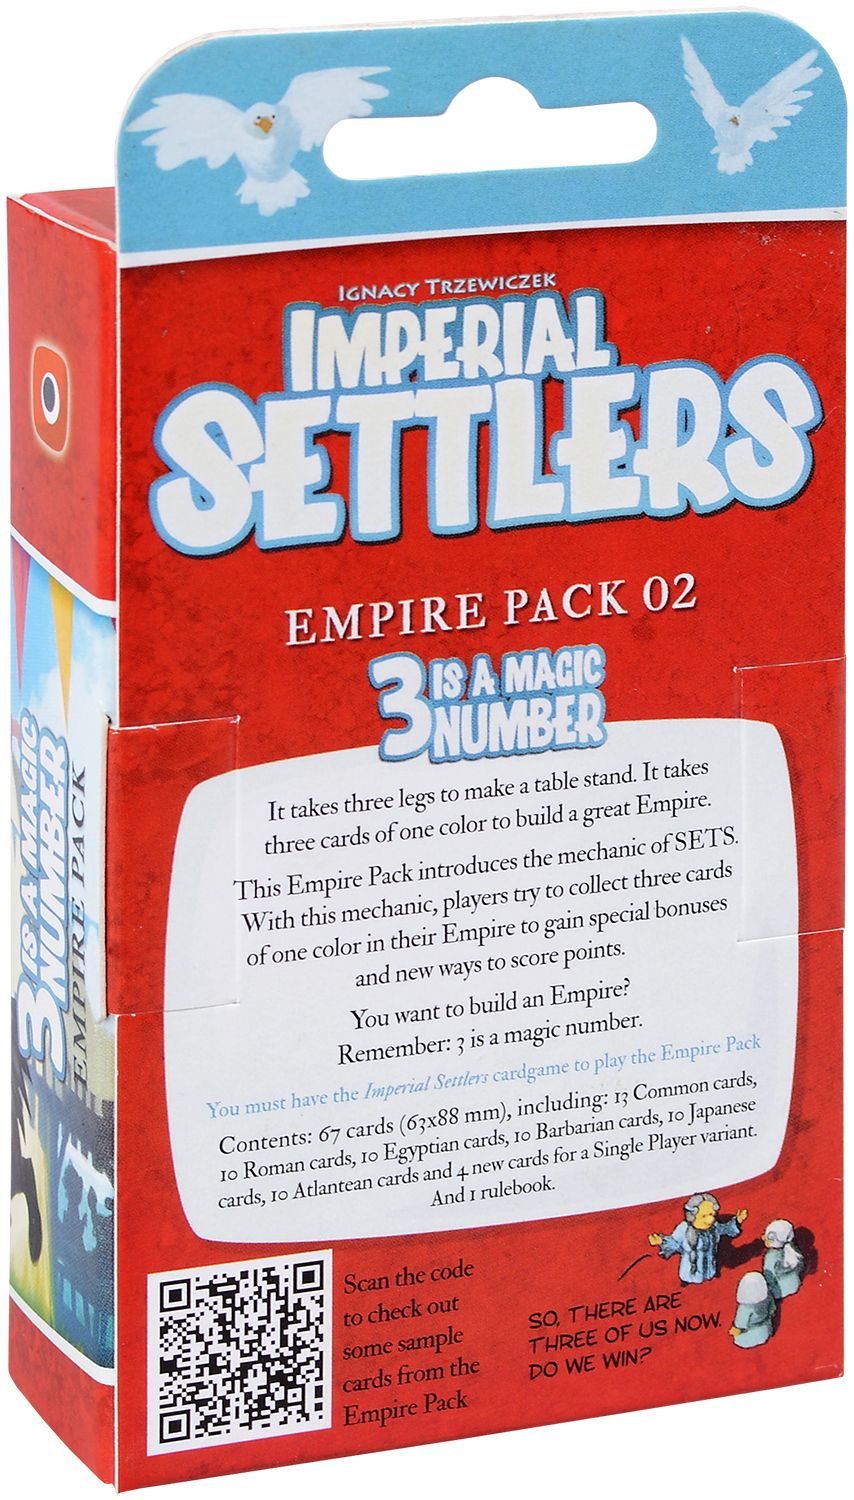 imperial settlers 3 is a magic number empire pack game